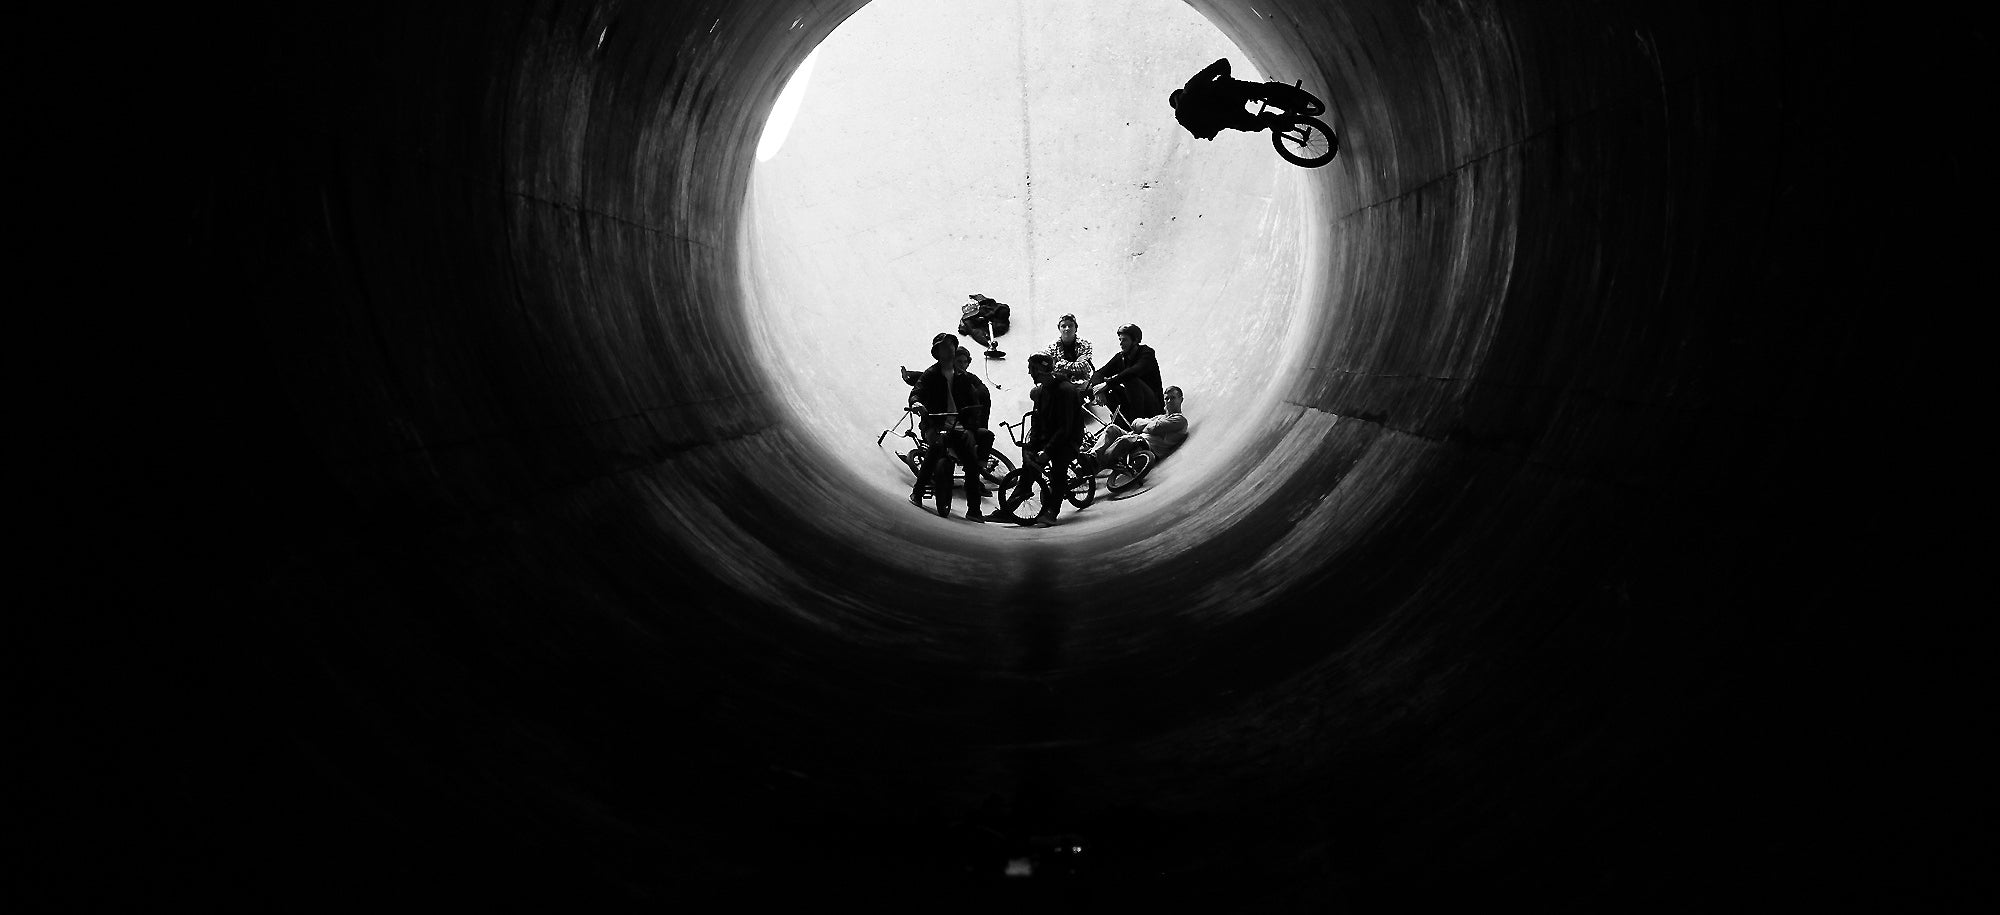 People riding BMX bicycles in a cement tube